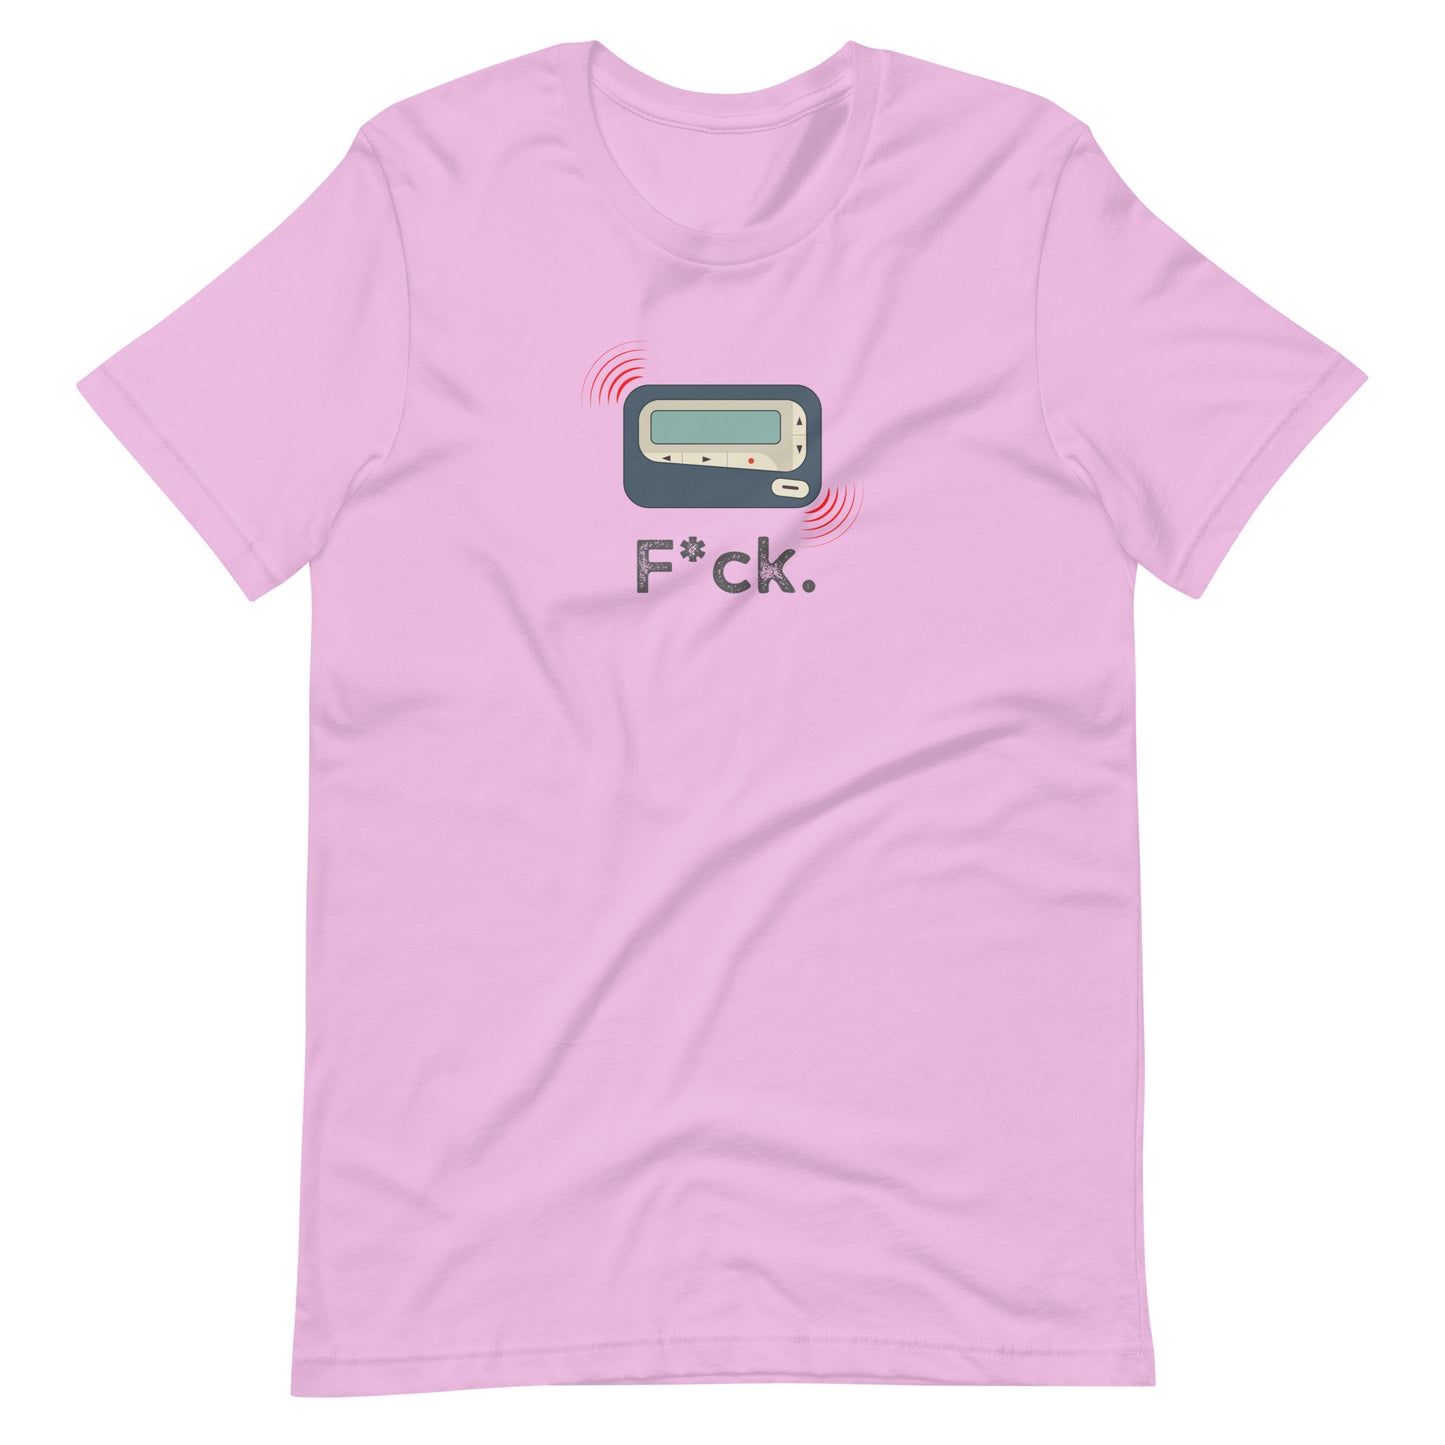 Graphic Tee, Pager, Funny Doctor Shirt, Medical Student, Funny Nurse Shirt, Funny Resident Shirt, Doctor, Physician, Resident, Nurse, PA, NP, Medical Student